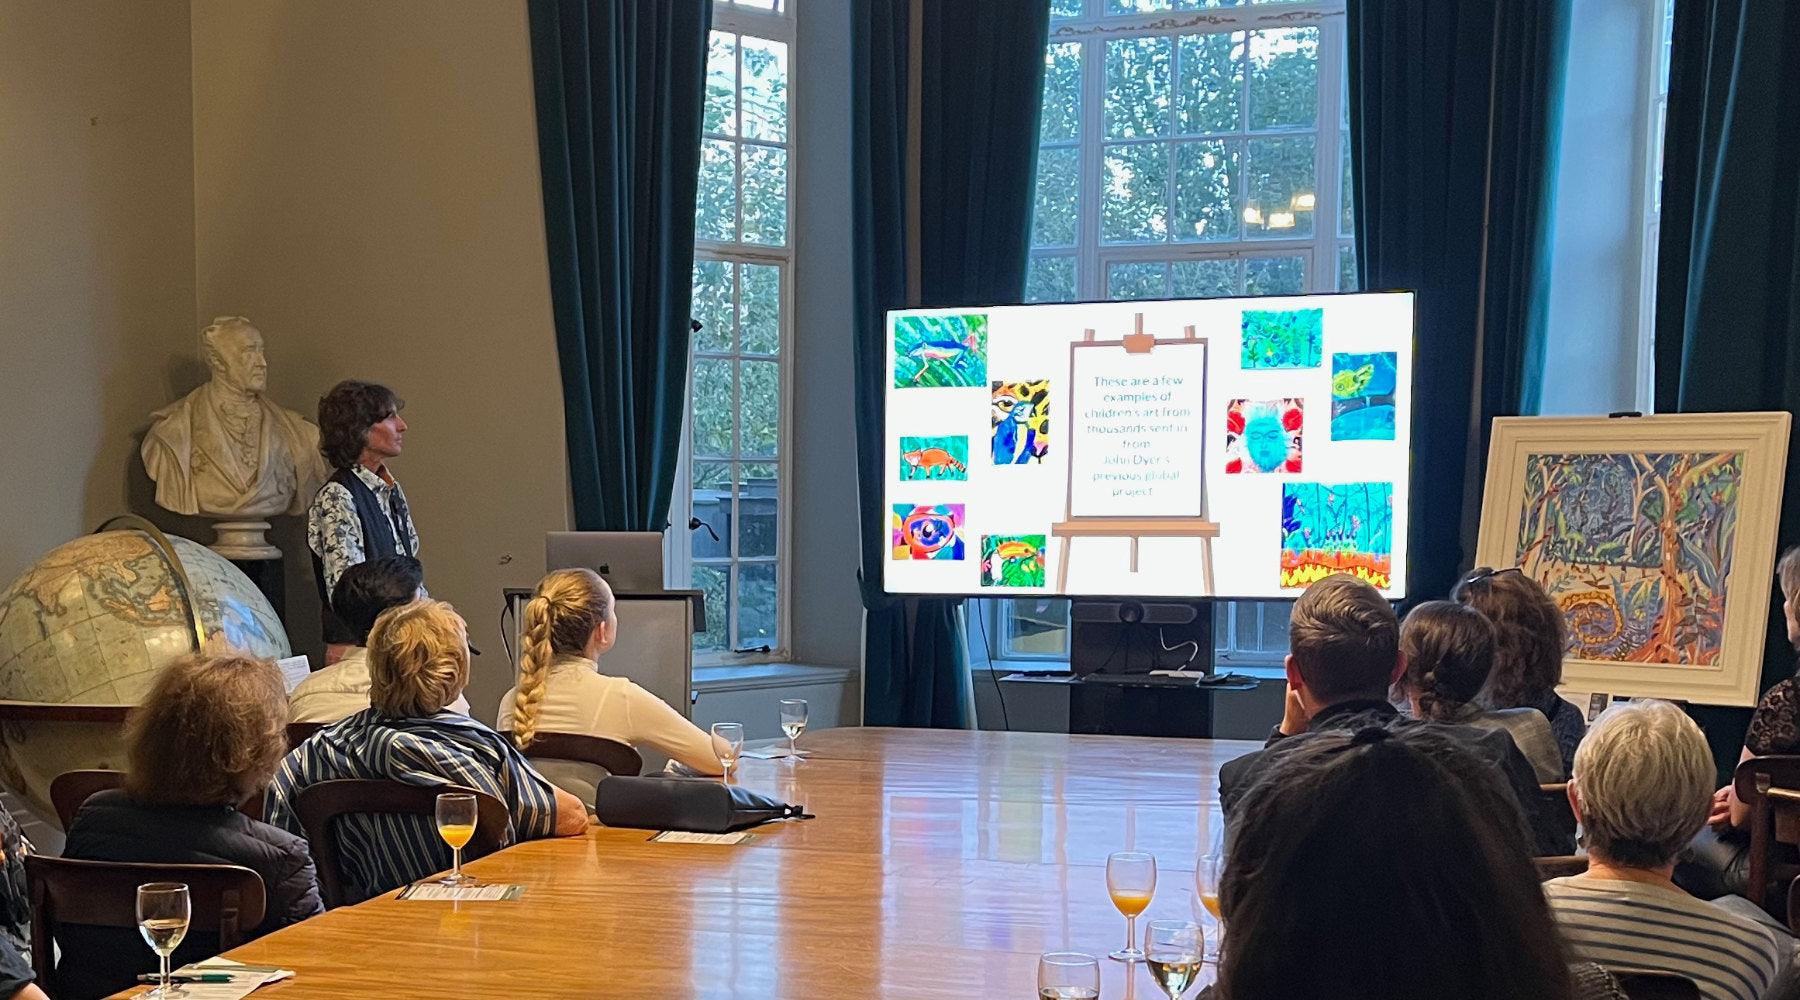 Artist John Dyer (standing on the far left) presenting a keynote on environmental art and the Last Chance to Paint initiative in the Council Room of the Royal Geographical Society (RGS) in London in September 2023.